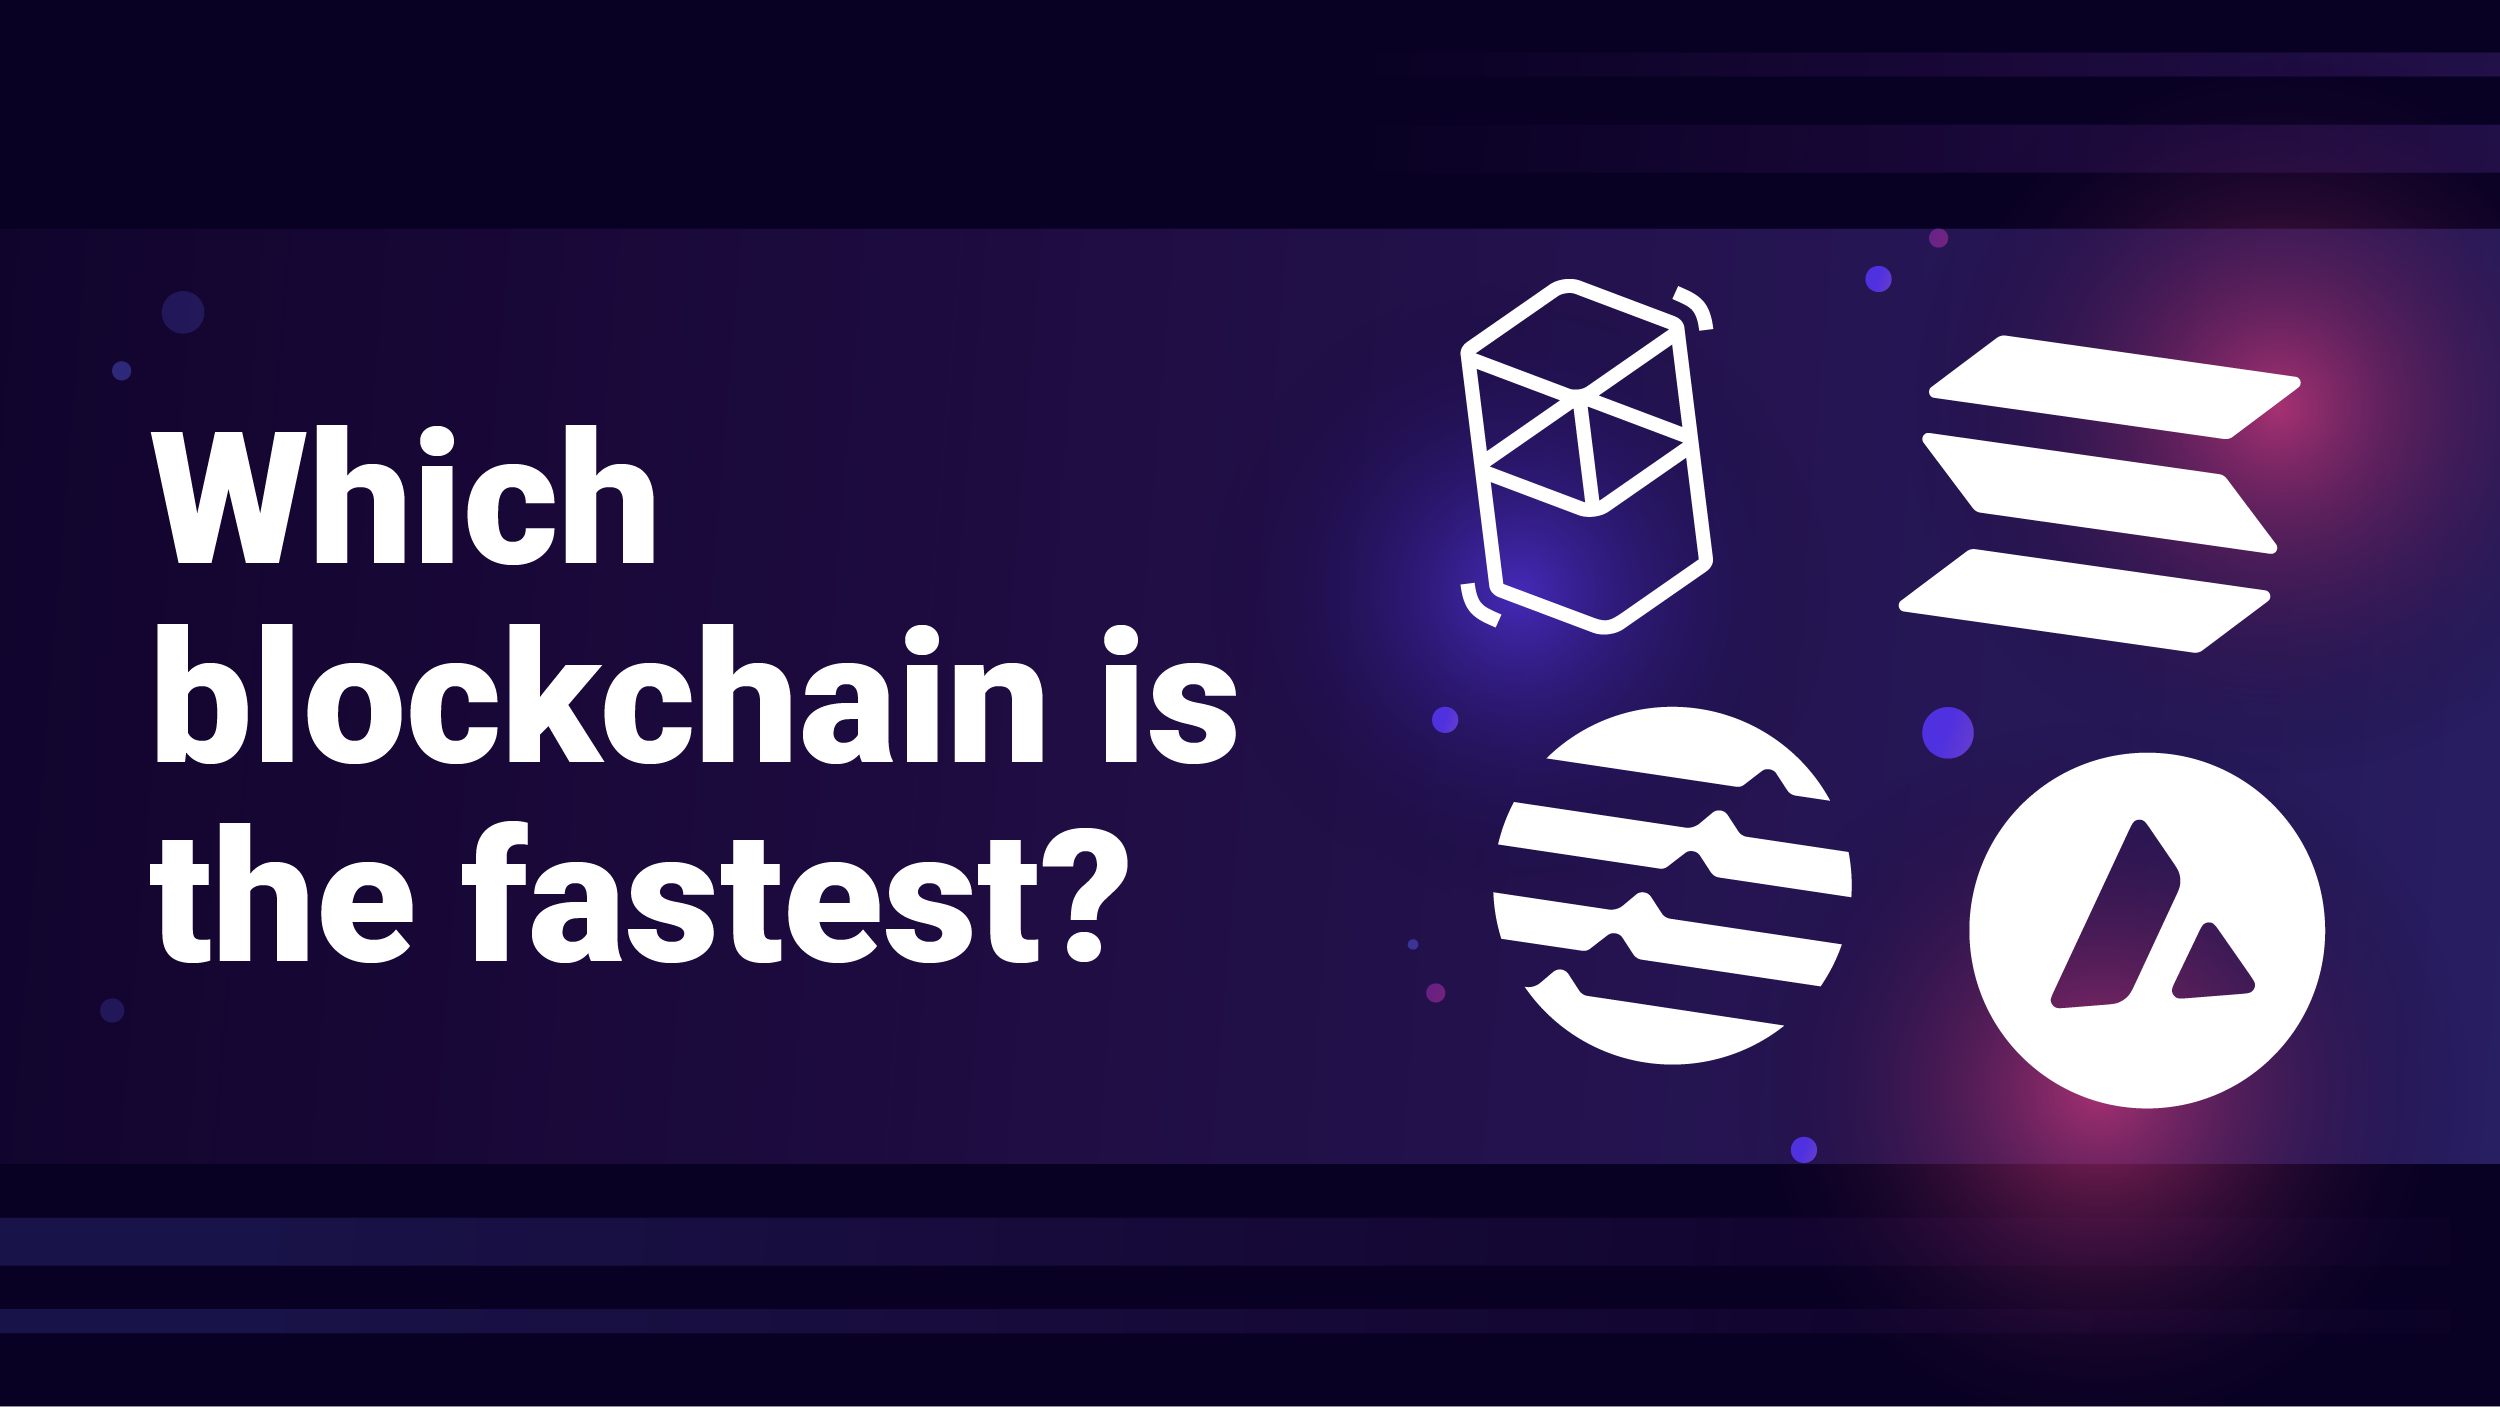 What is the fastest blockchain